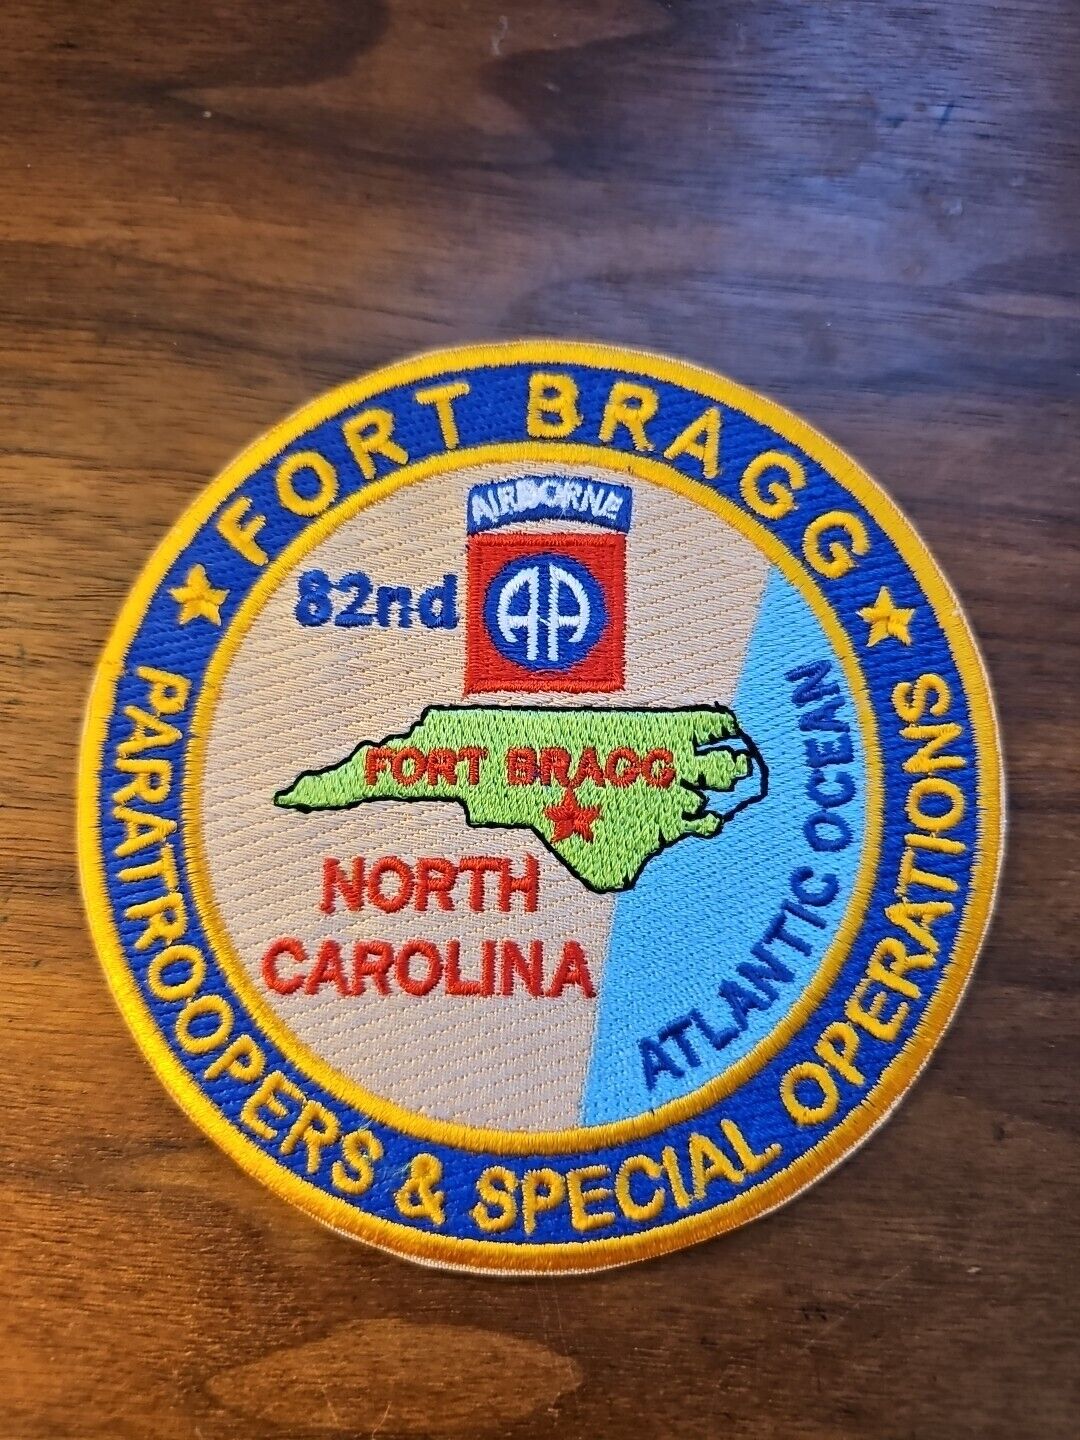 FORT BRAGG, NORTH CAROLINA, PARATROOPERS & SPECIAL OPERATIONS